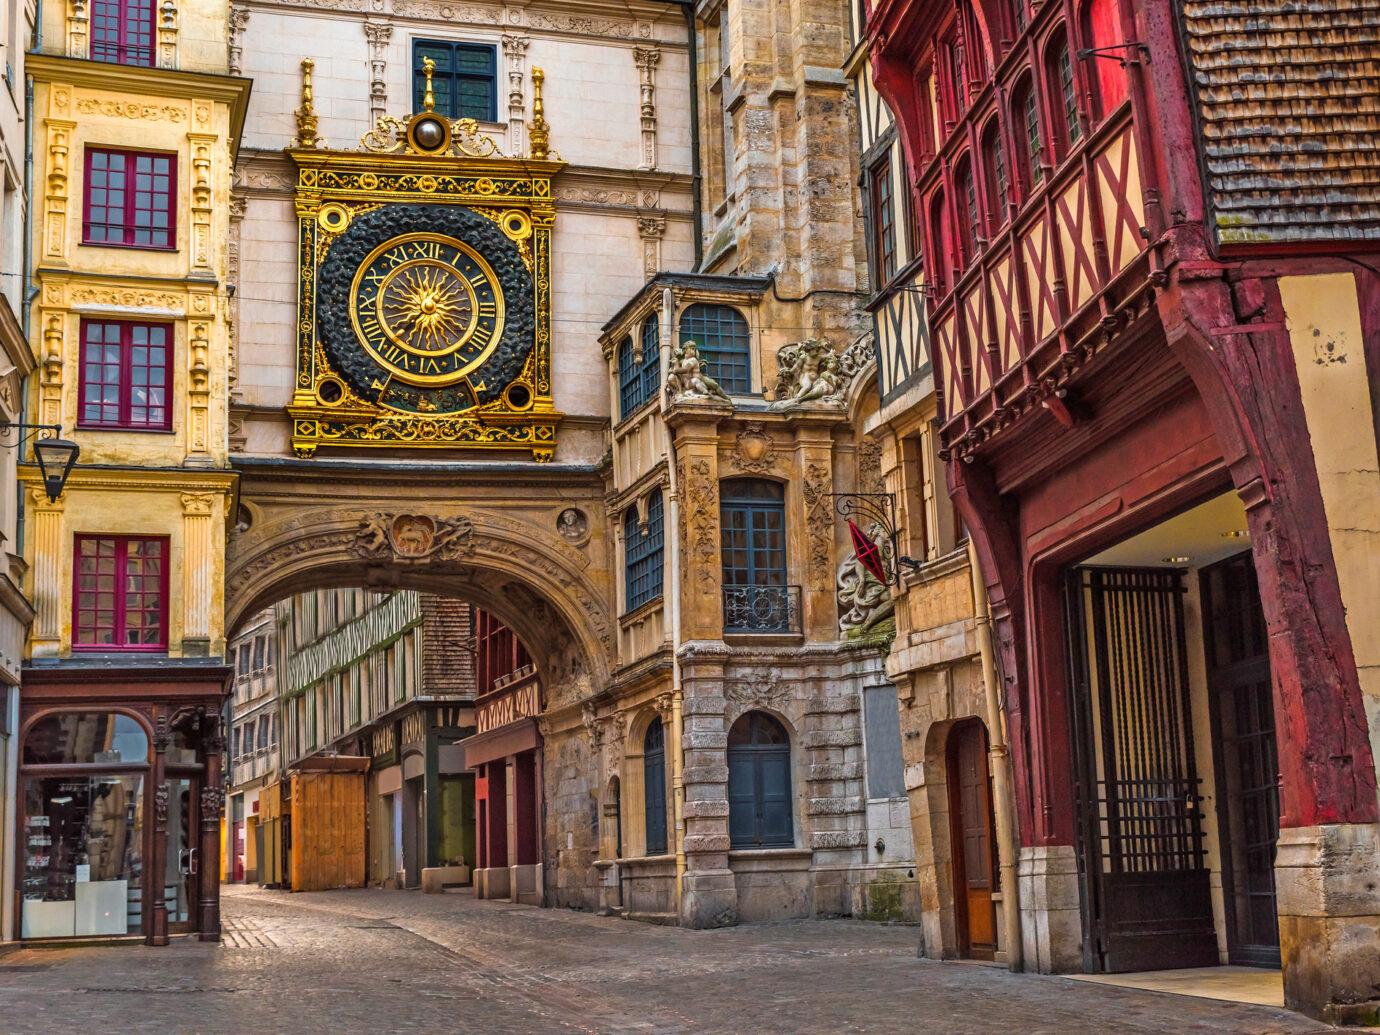 Old cozy street in Rouen with famos Great clocks or Gros Horloge of Rouen, Normandy, France with nobody